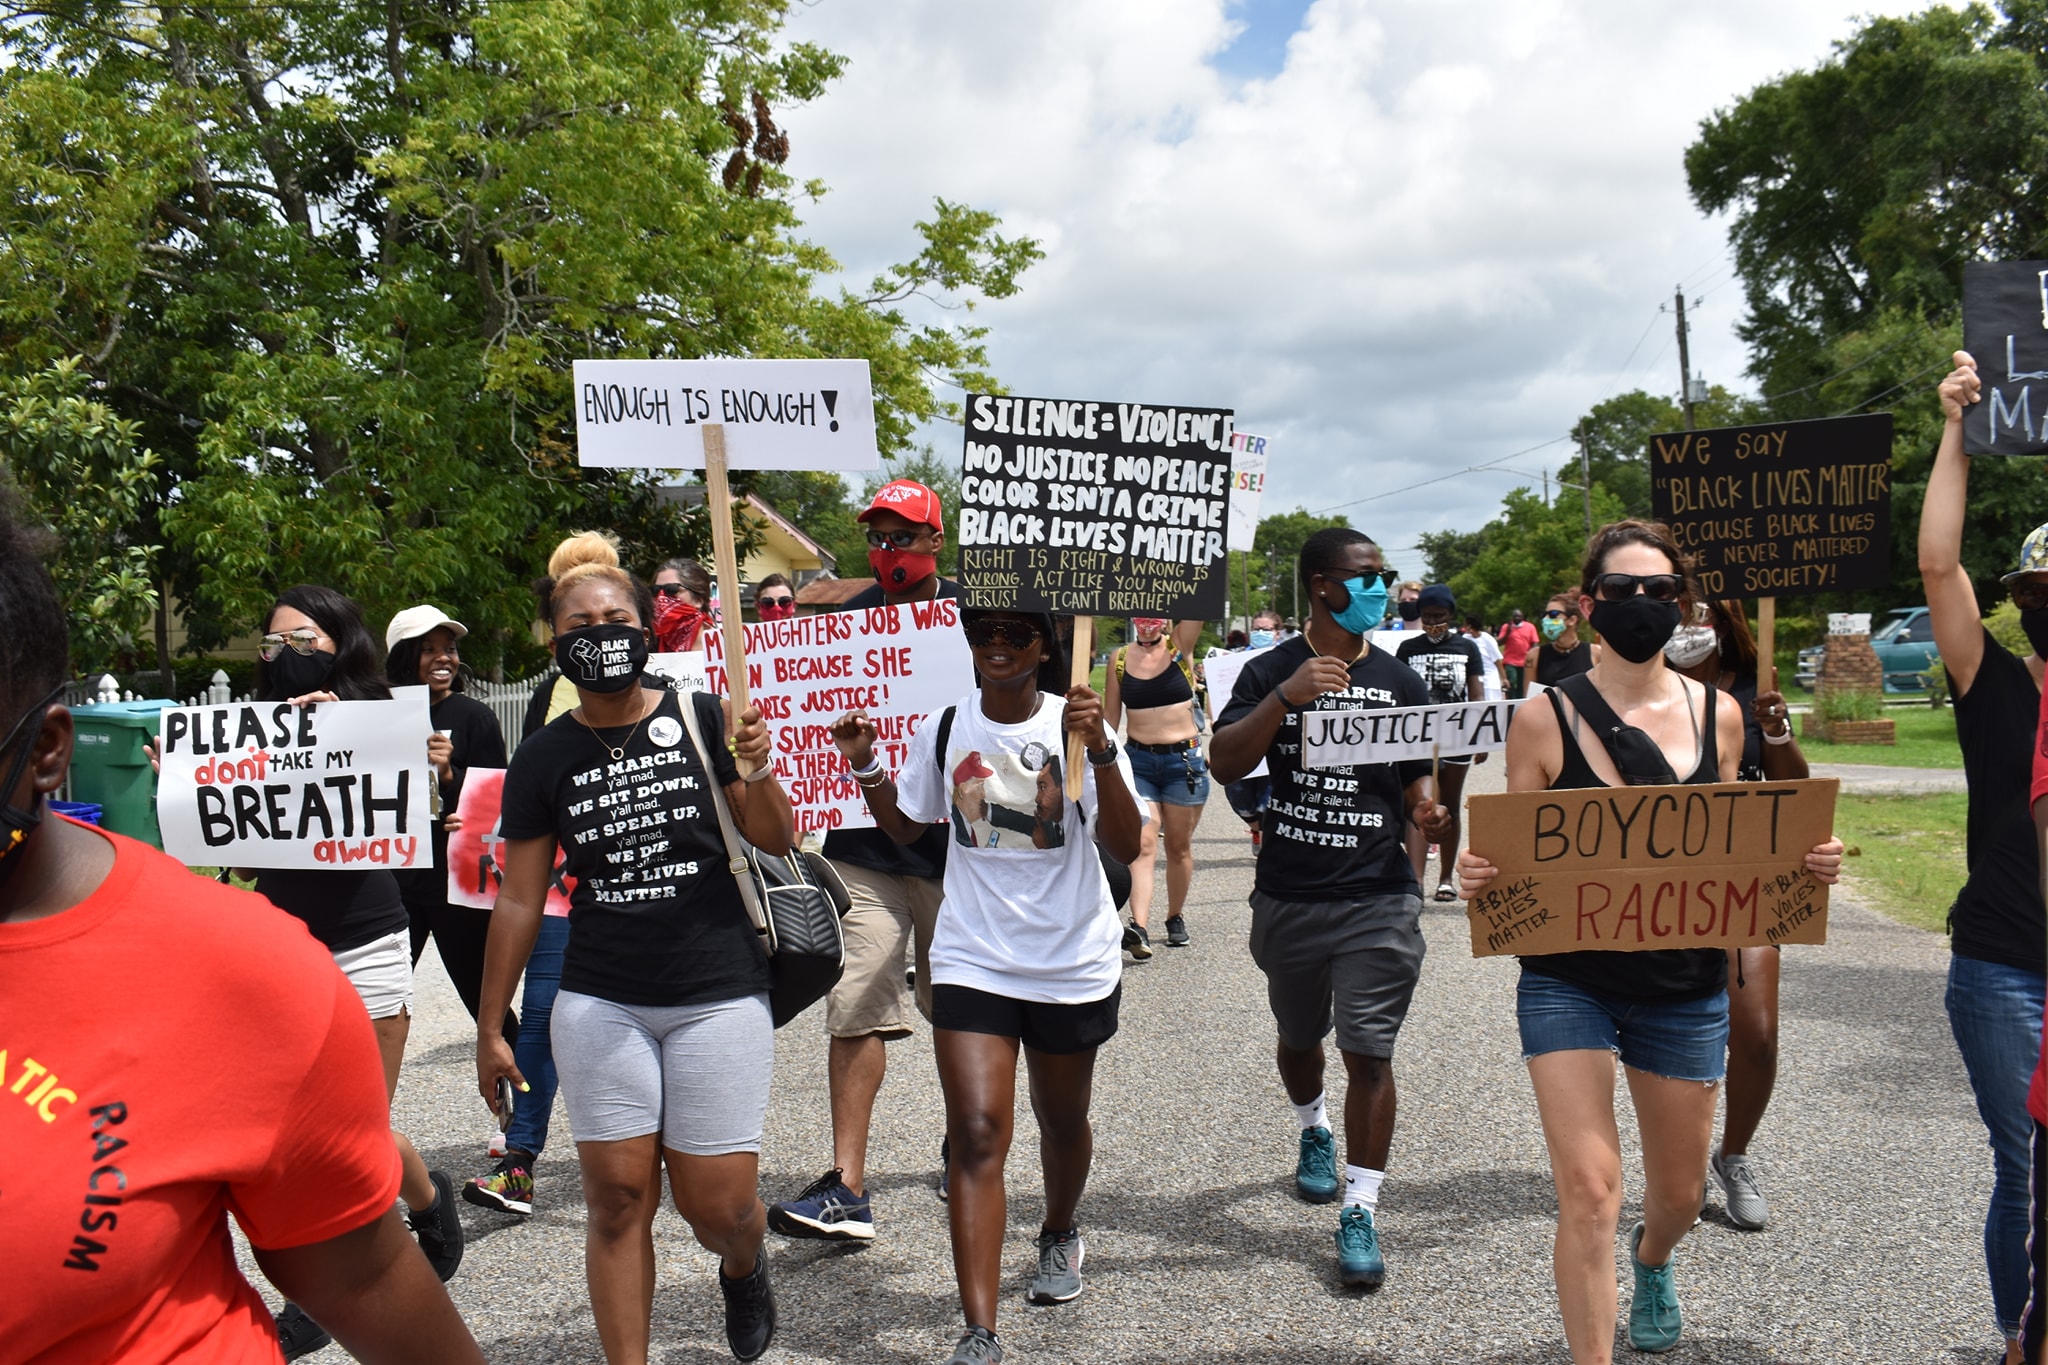 A group of protestors marching